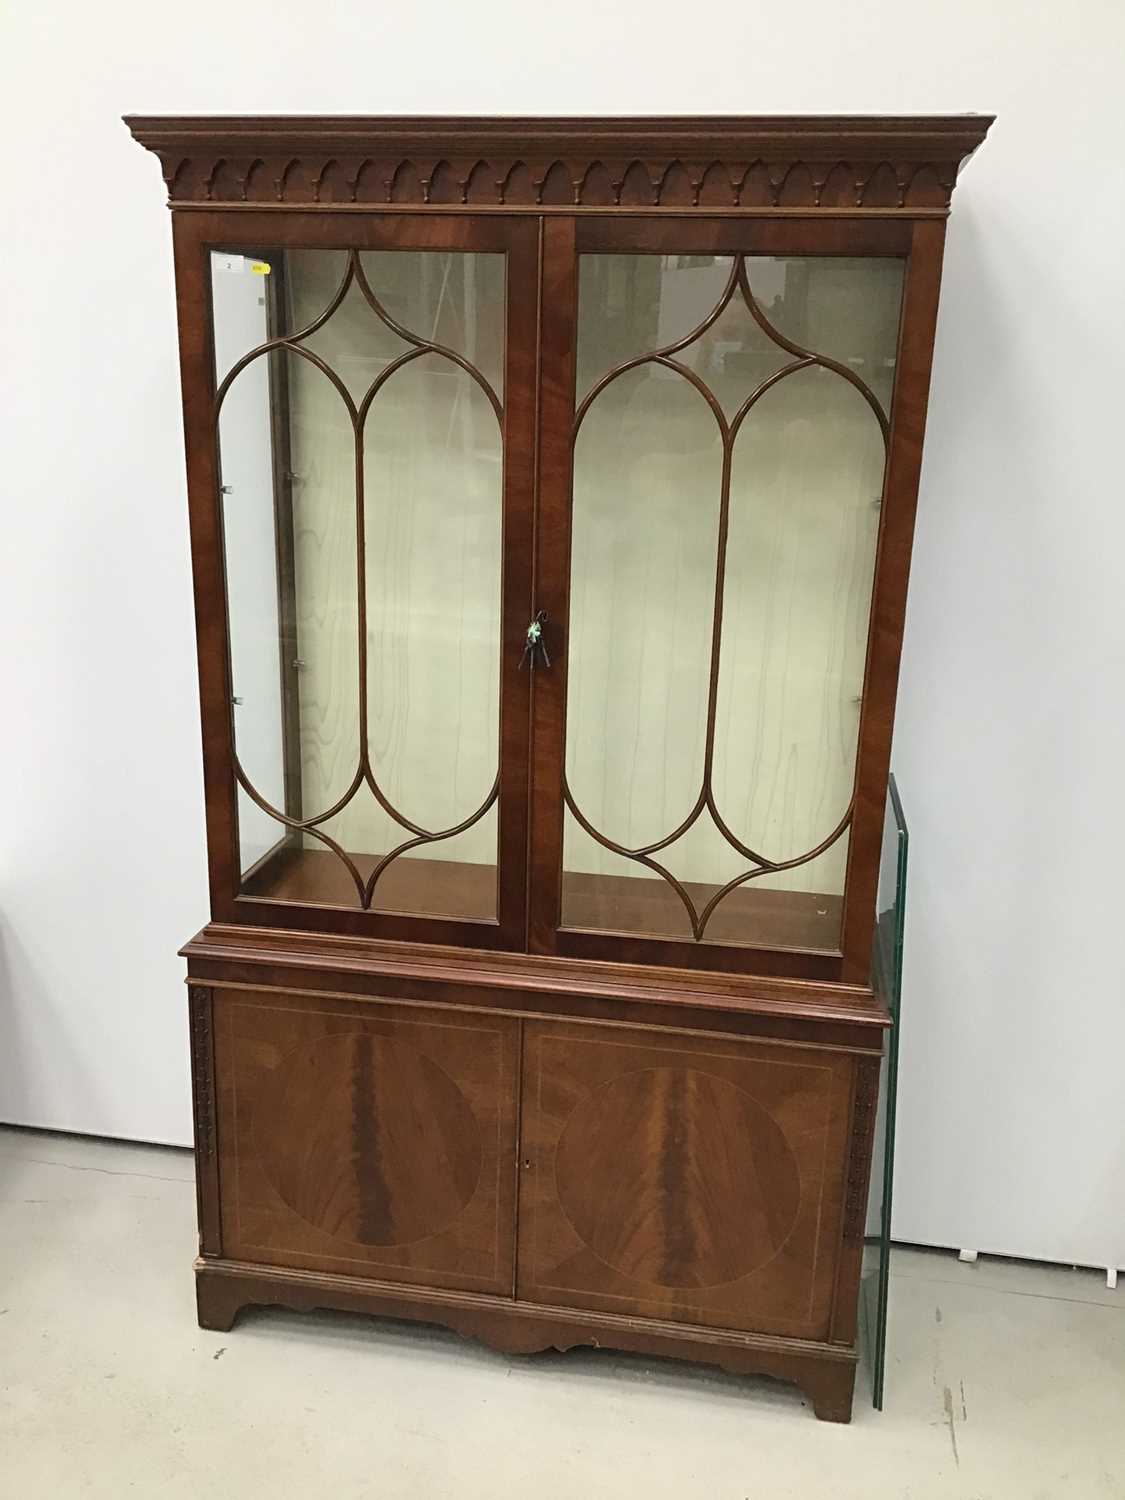 Lot 2 - Good quality George III-style mahogany two height display cabinet, the top enclosed by gothic astragal glazed doors with cupboards below